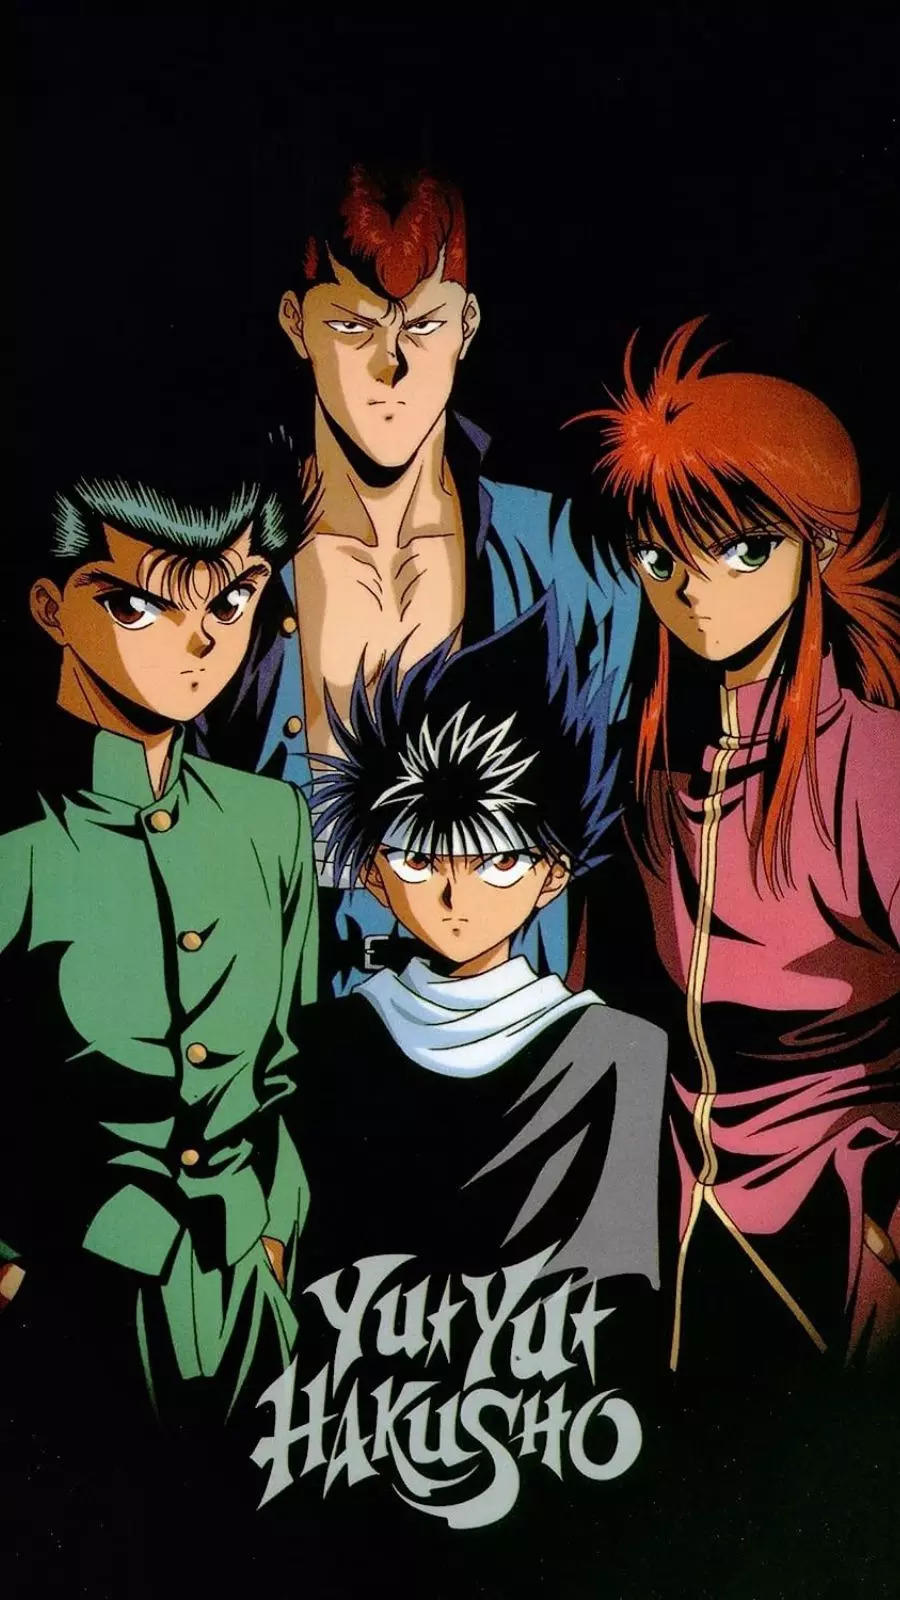 10 Dark Shonen Anime That Were Too Mature for Its Audience